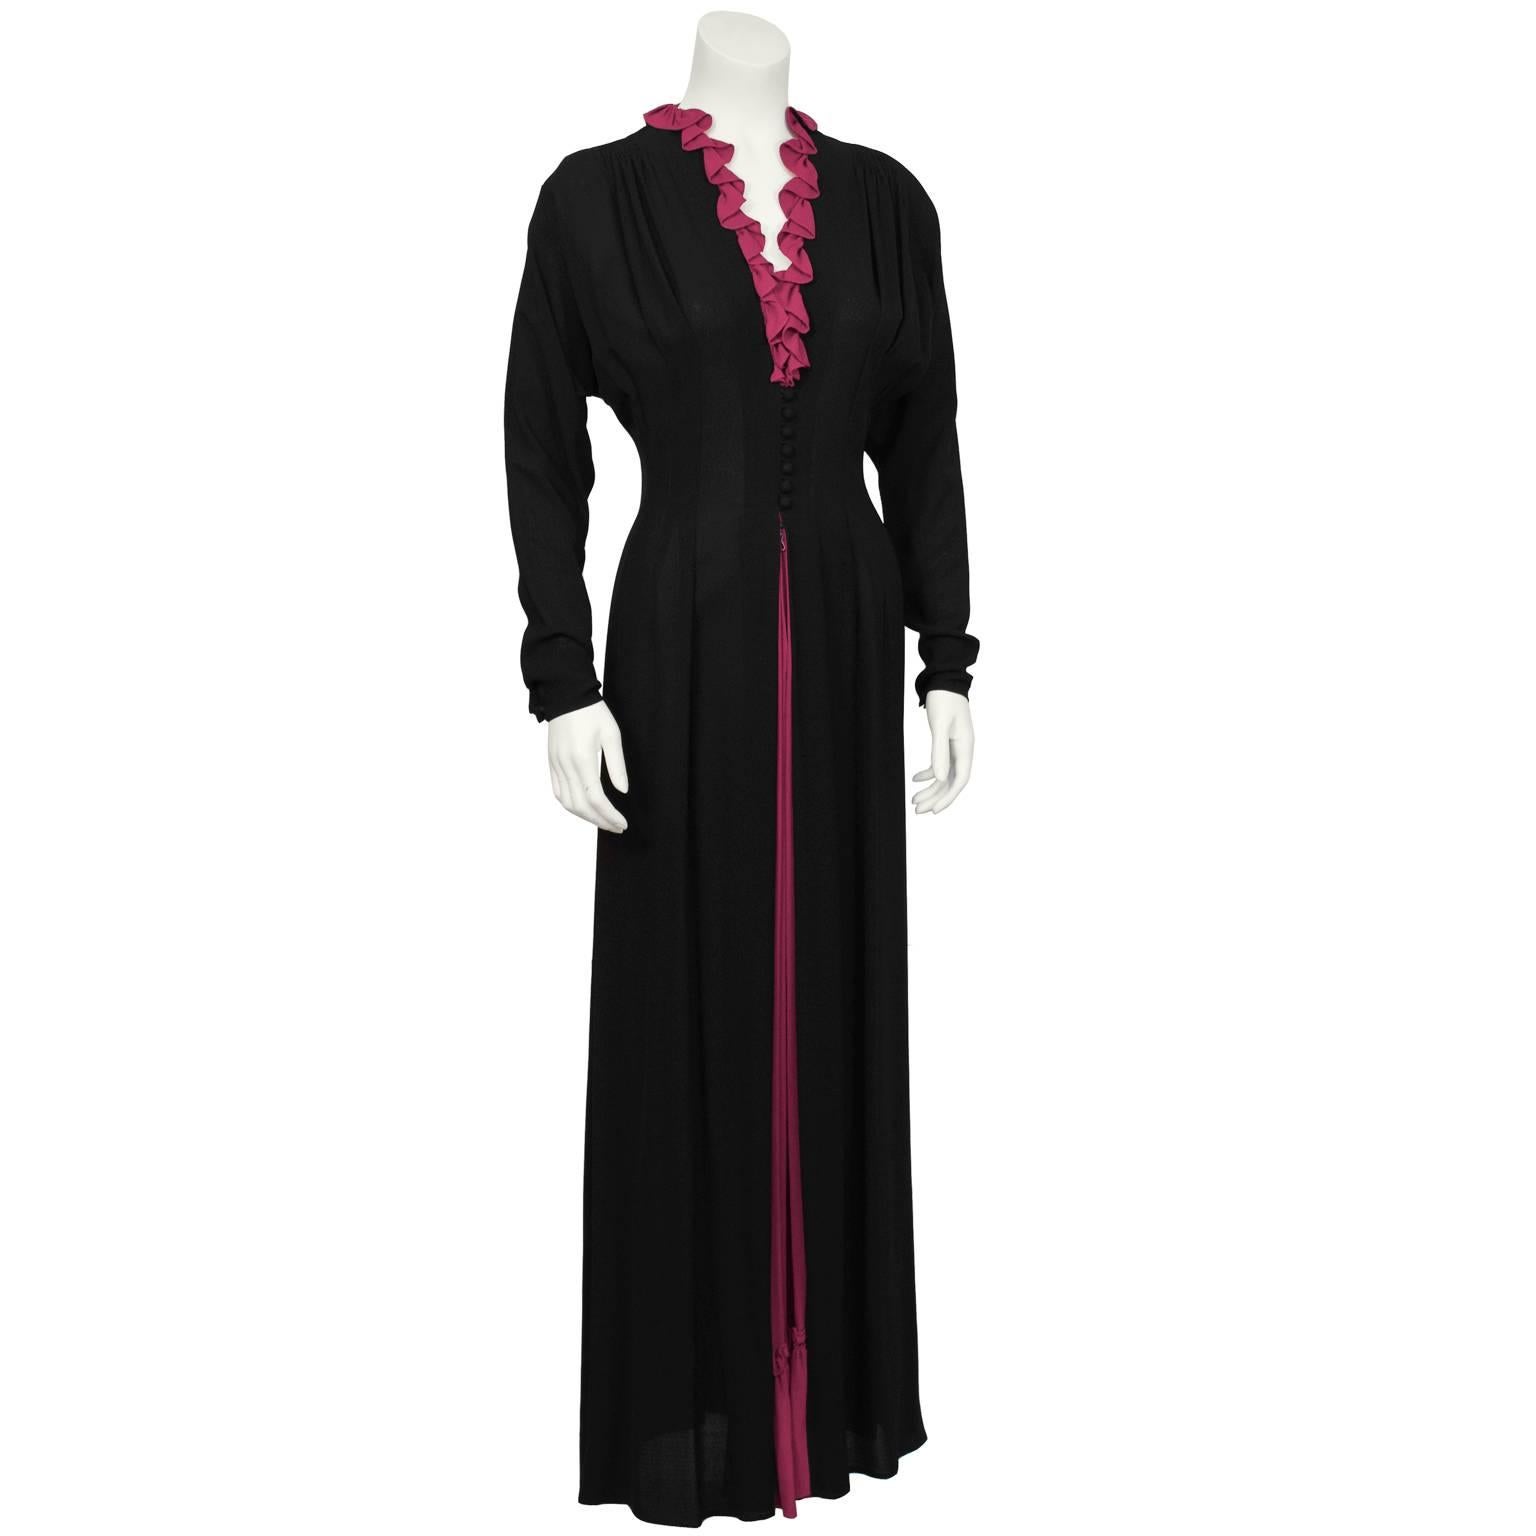 Black moss crepe tea gown with fuchsia ruffle detail from the 1970’s. Dress features dolman style sleeve and a deep V neckline detailed with a bold fuchsia ruffle. Fitted at the waist, fastens up the front with 7 covered buttons and a hidden zipper.